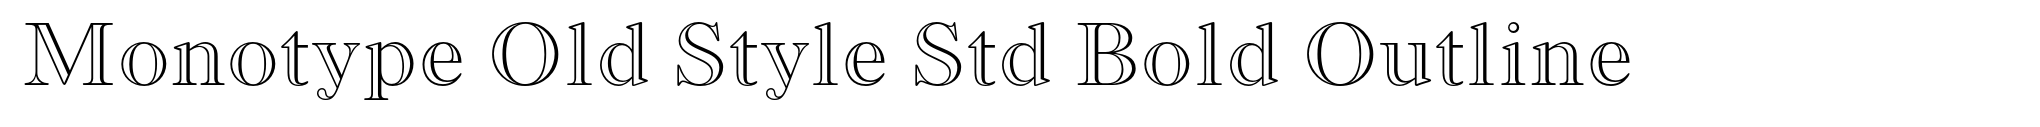 Monotype Old Style Std Bold Outline image